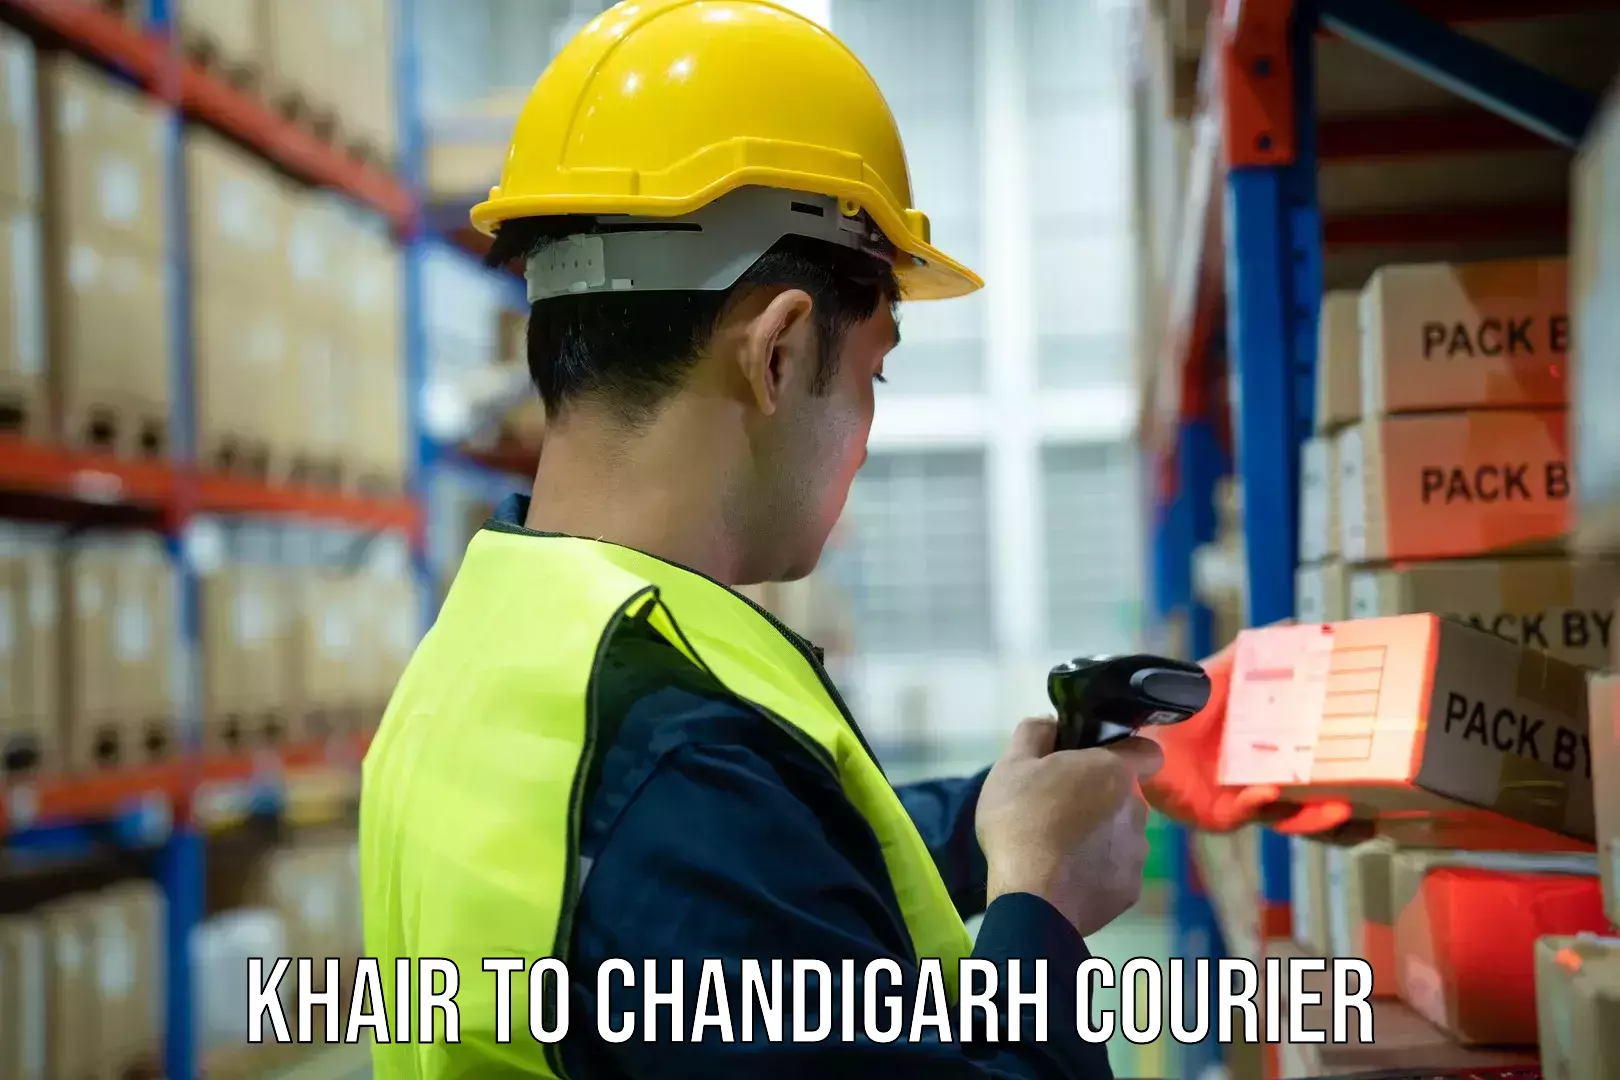 Global courier networks Khair to Chandigarh